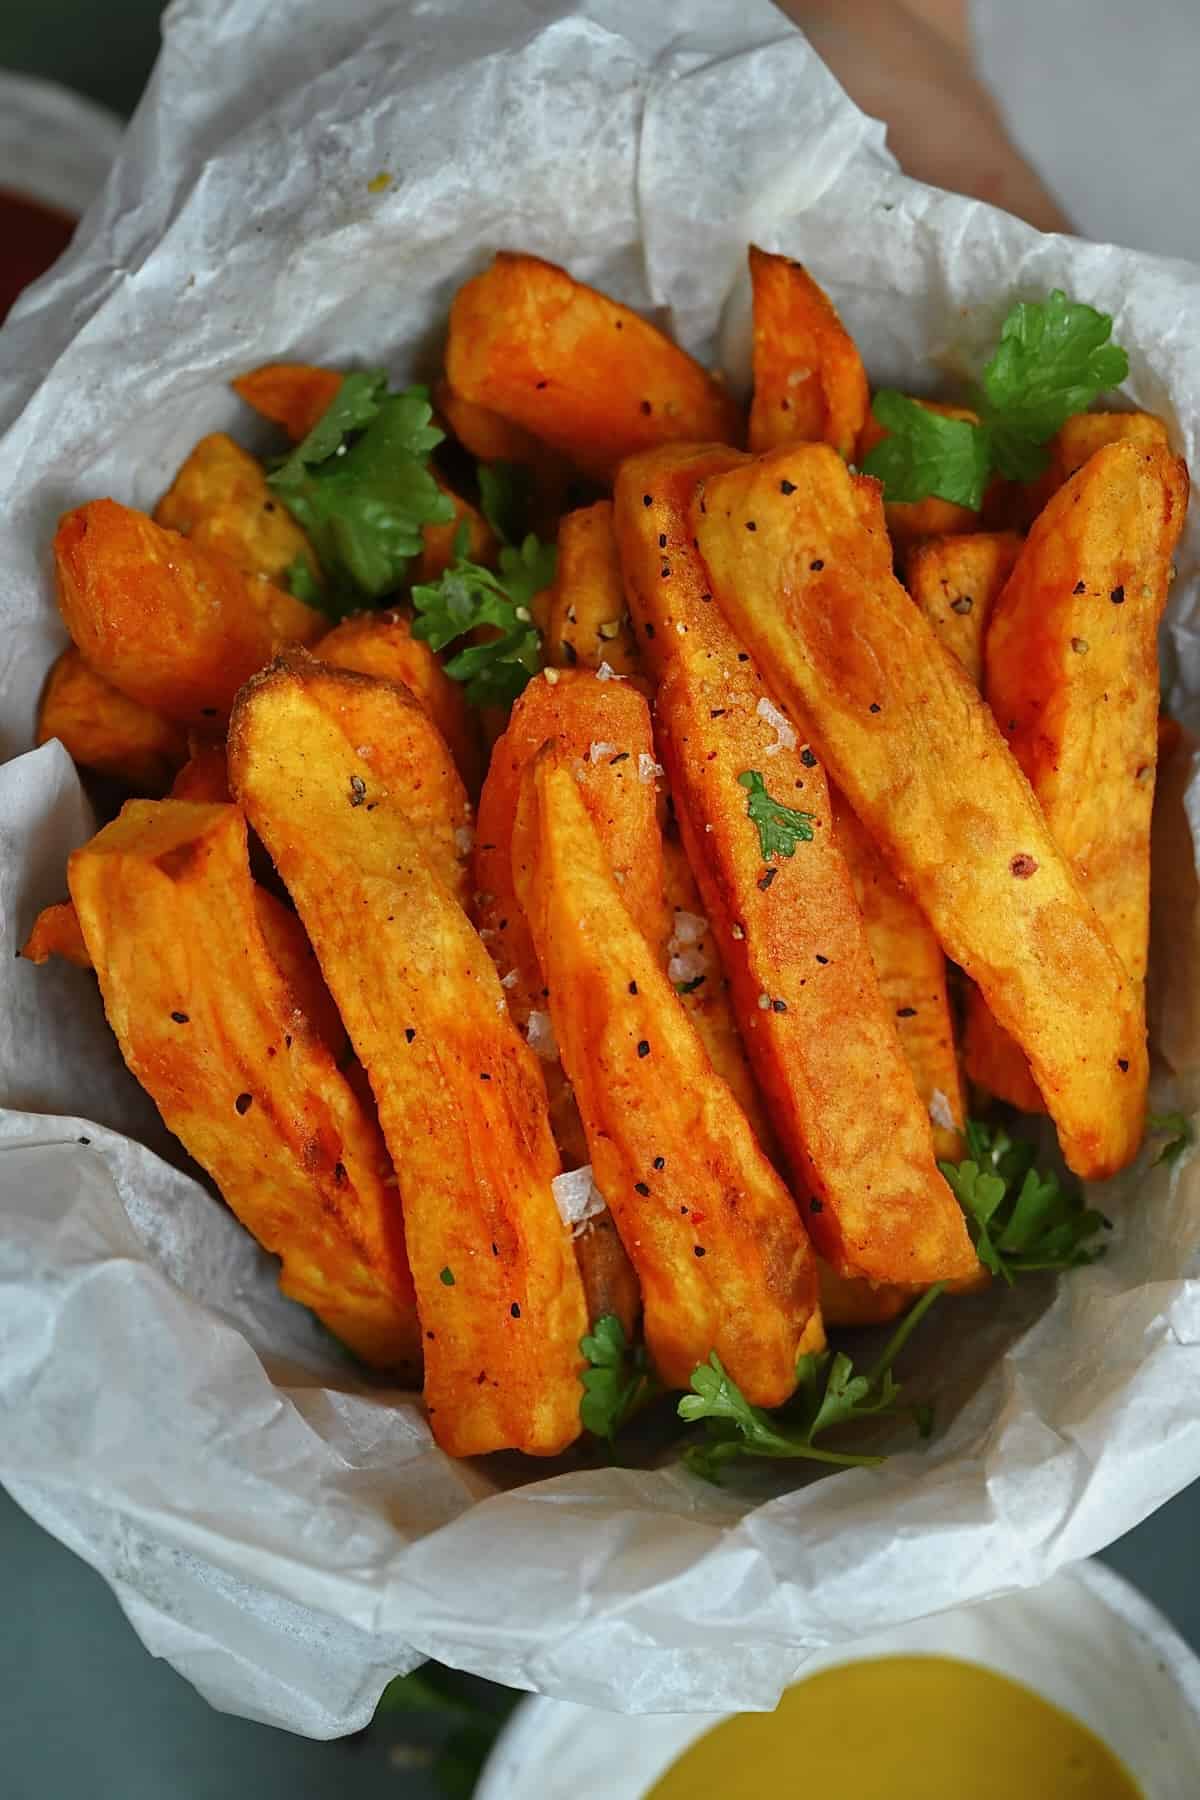 A serving of homemade sweet potato fries in air fryer